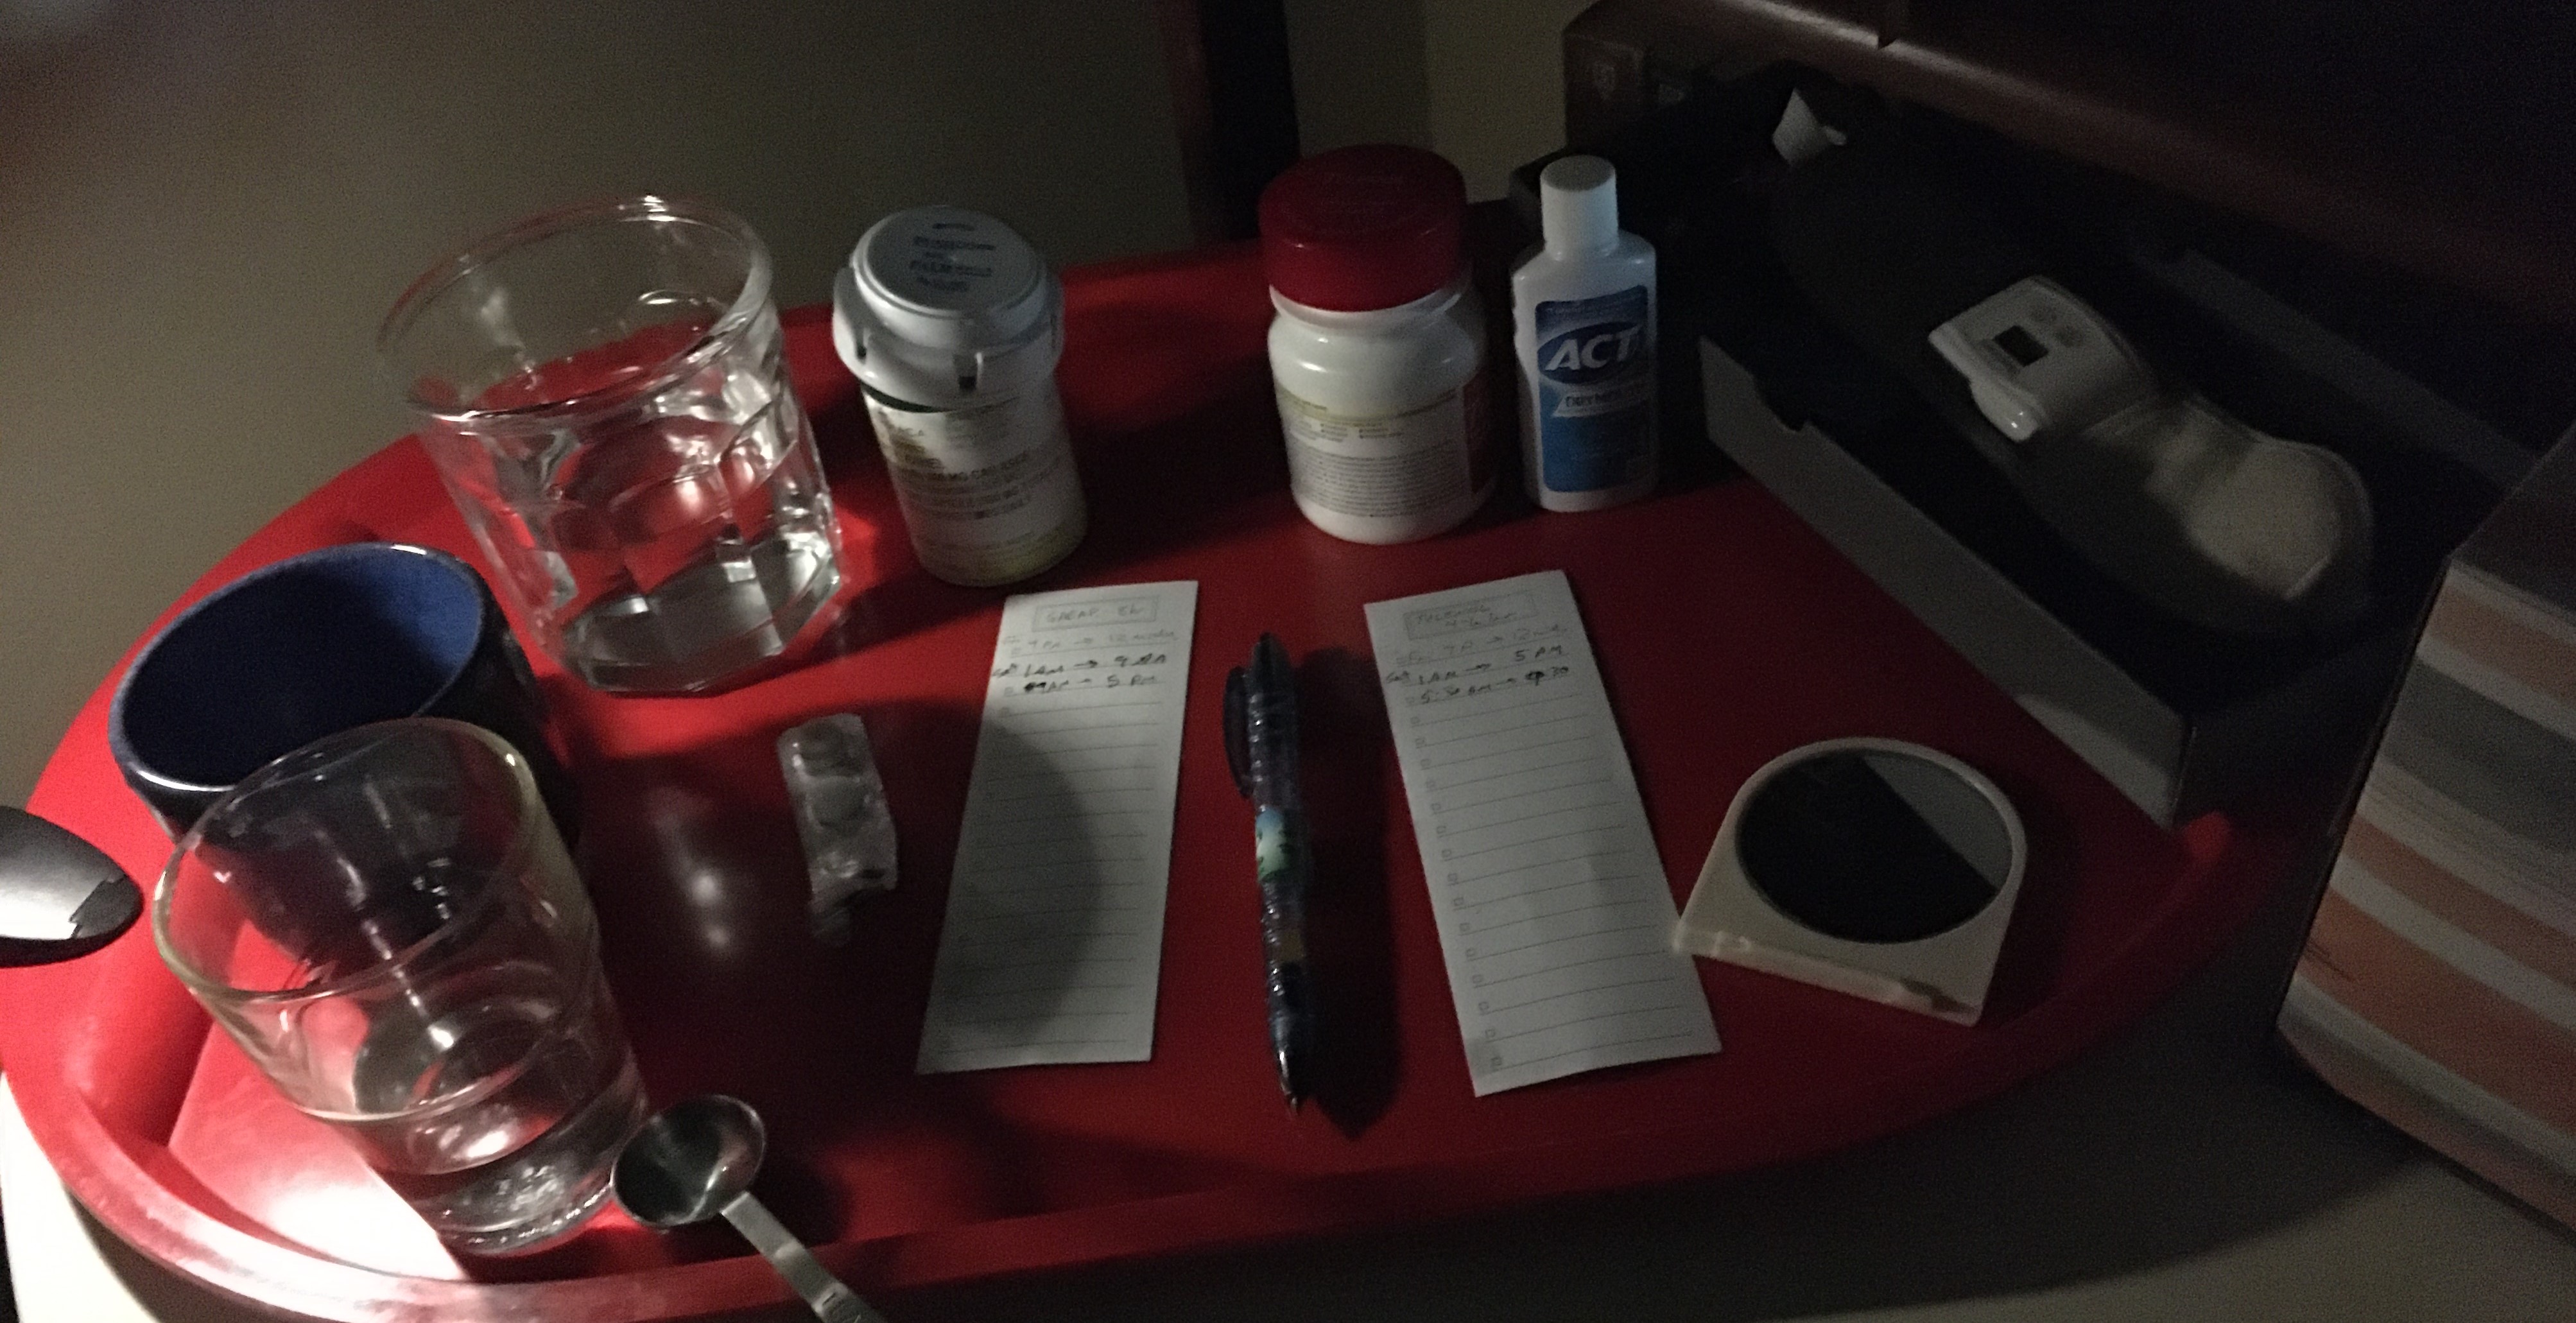 Photo of red tray holding several drinking glasses, bottles of medicine, notes, a mirror.